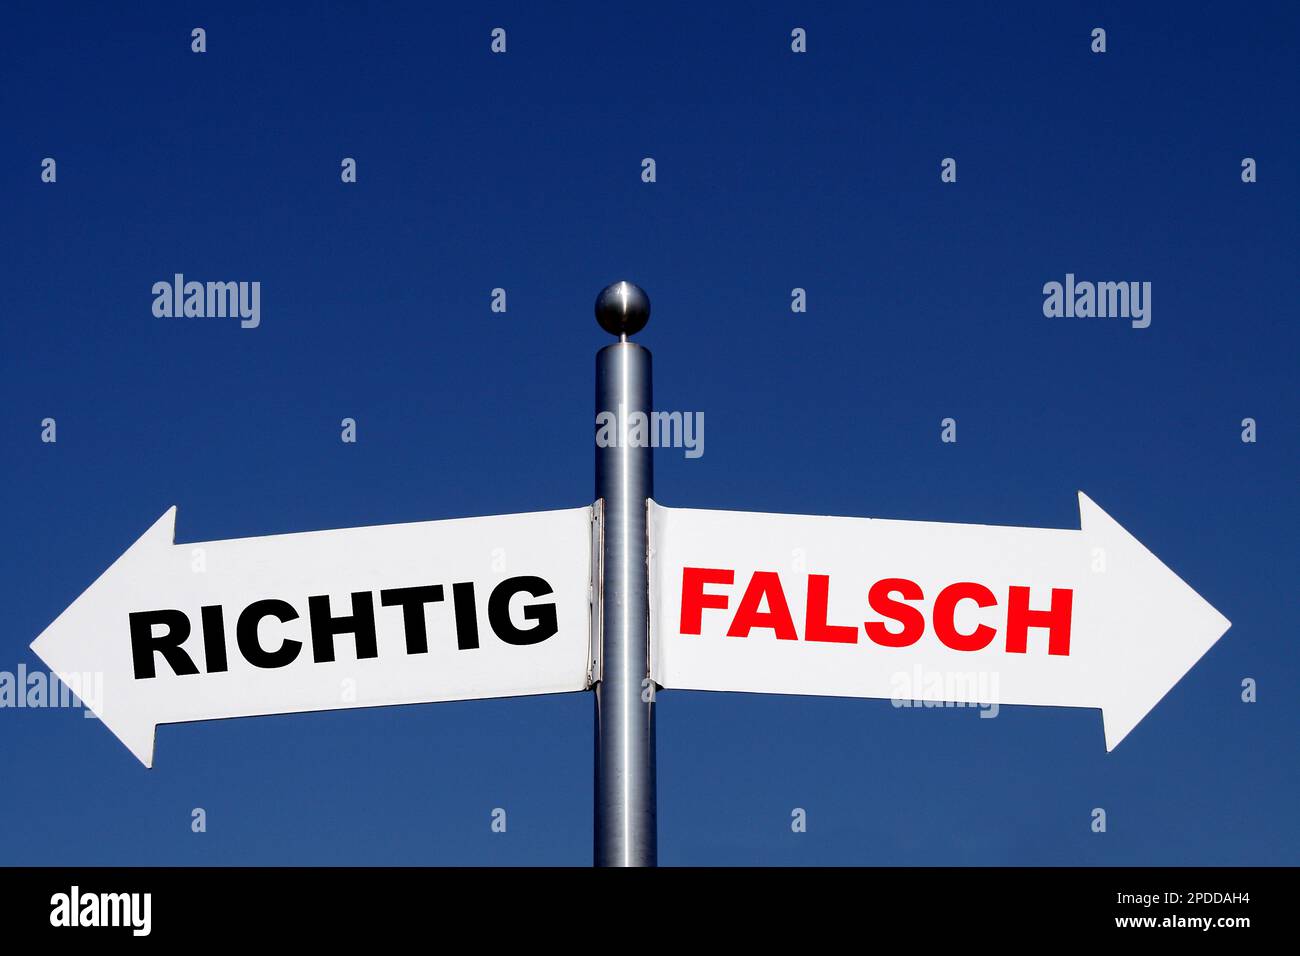 signposts pointing in different directions, options richtig - falsch, right - bad Stock Photo